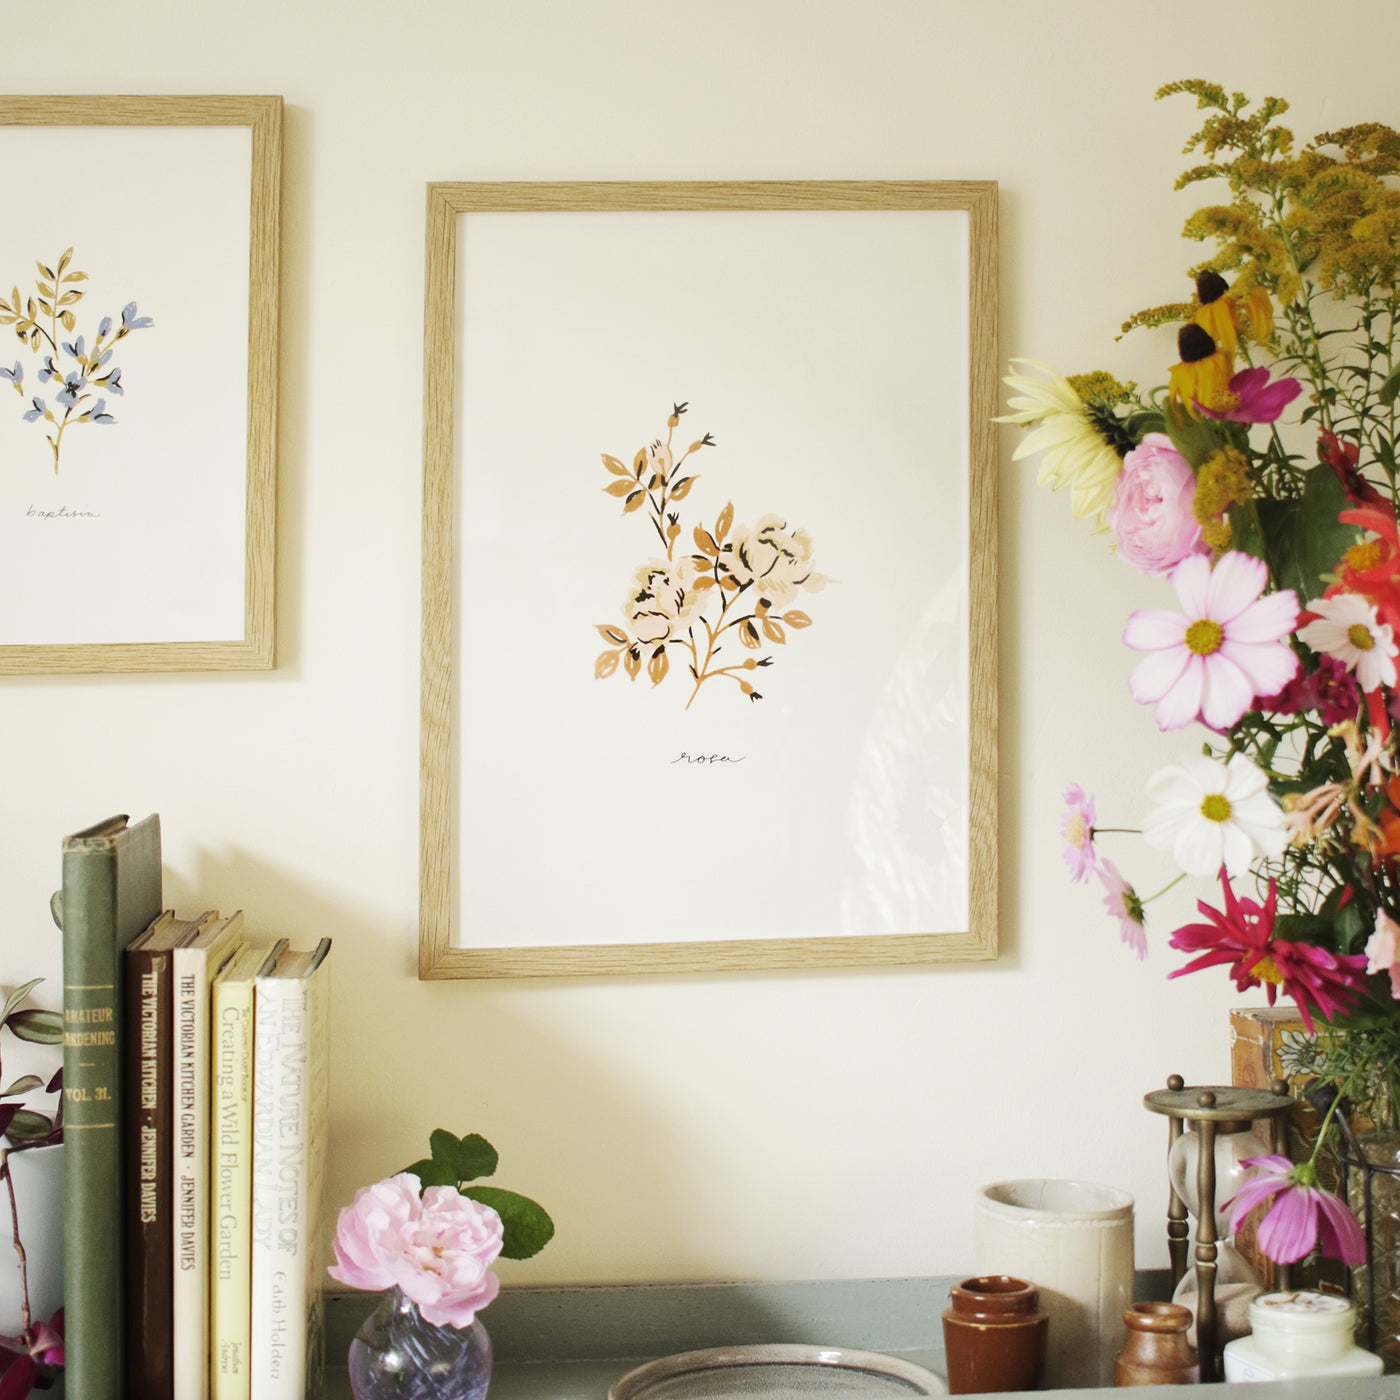 rose flower print hanging above a country style cabinet